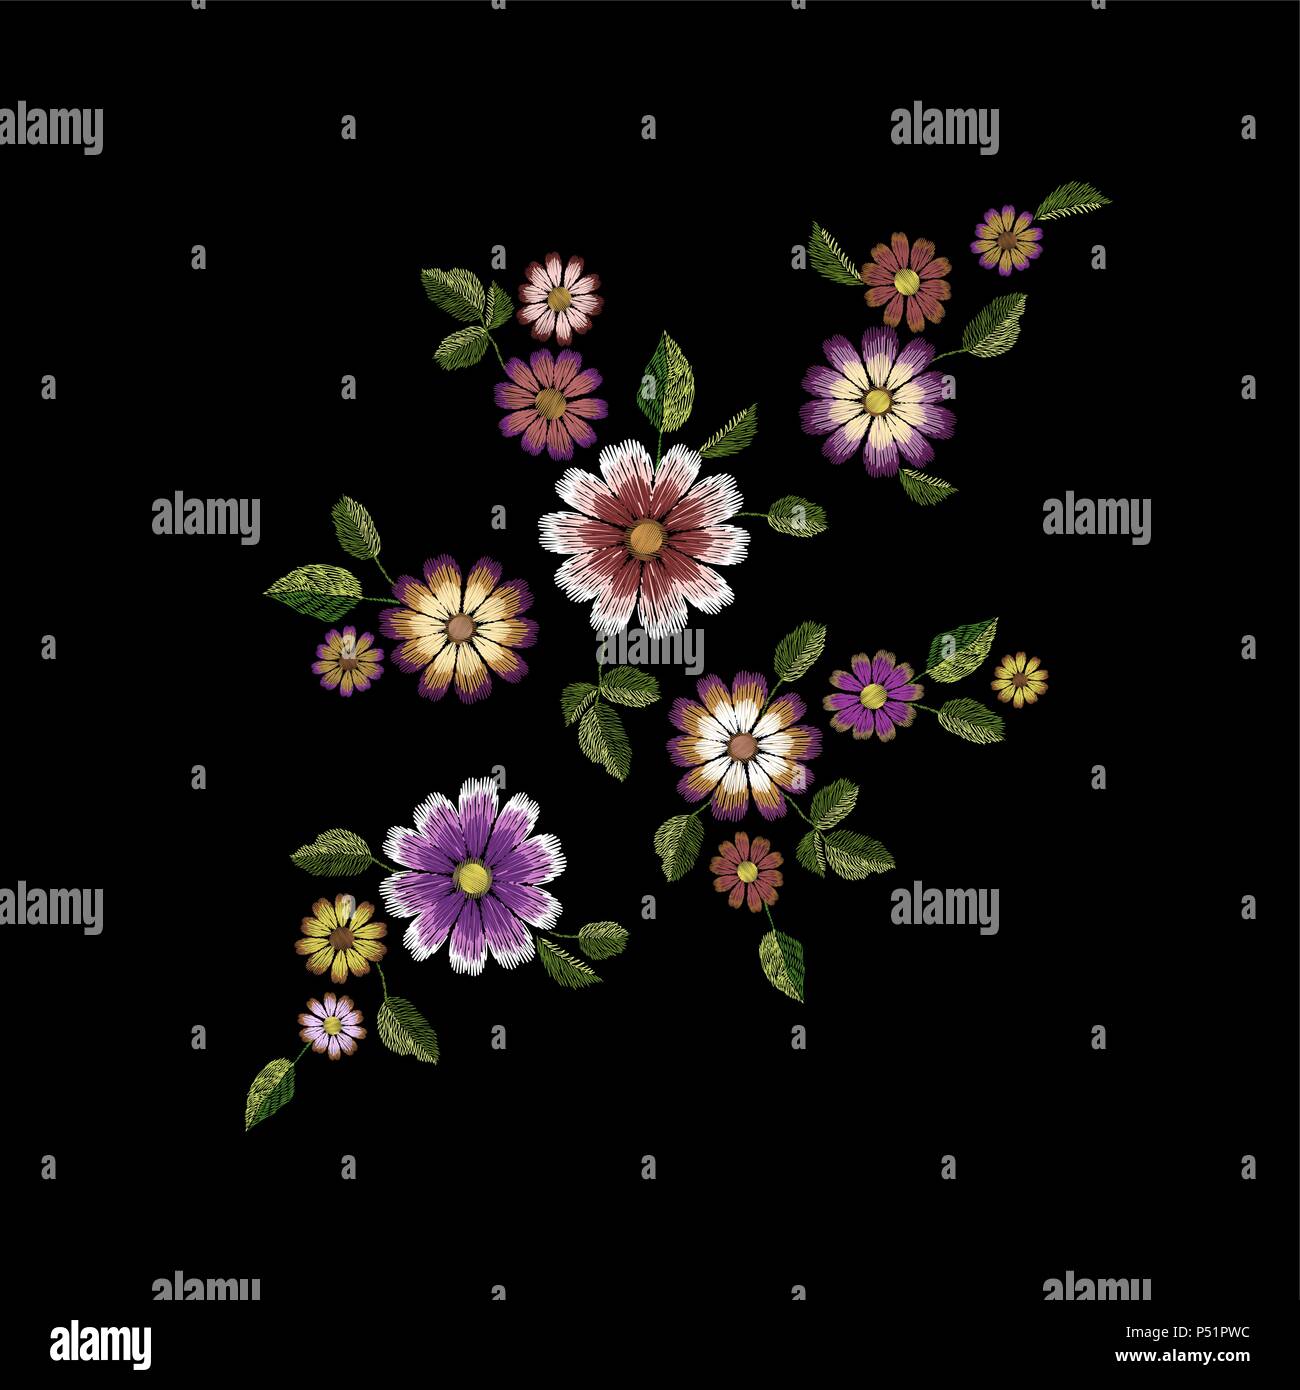 Embroidery summer flower fashion patch. Realistic texture design template. Floral ornate daisy gerbera clothing print decoration vector illustration Stock Vector